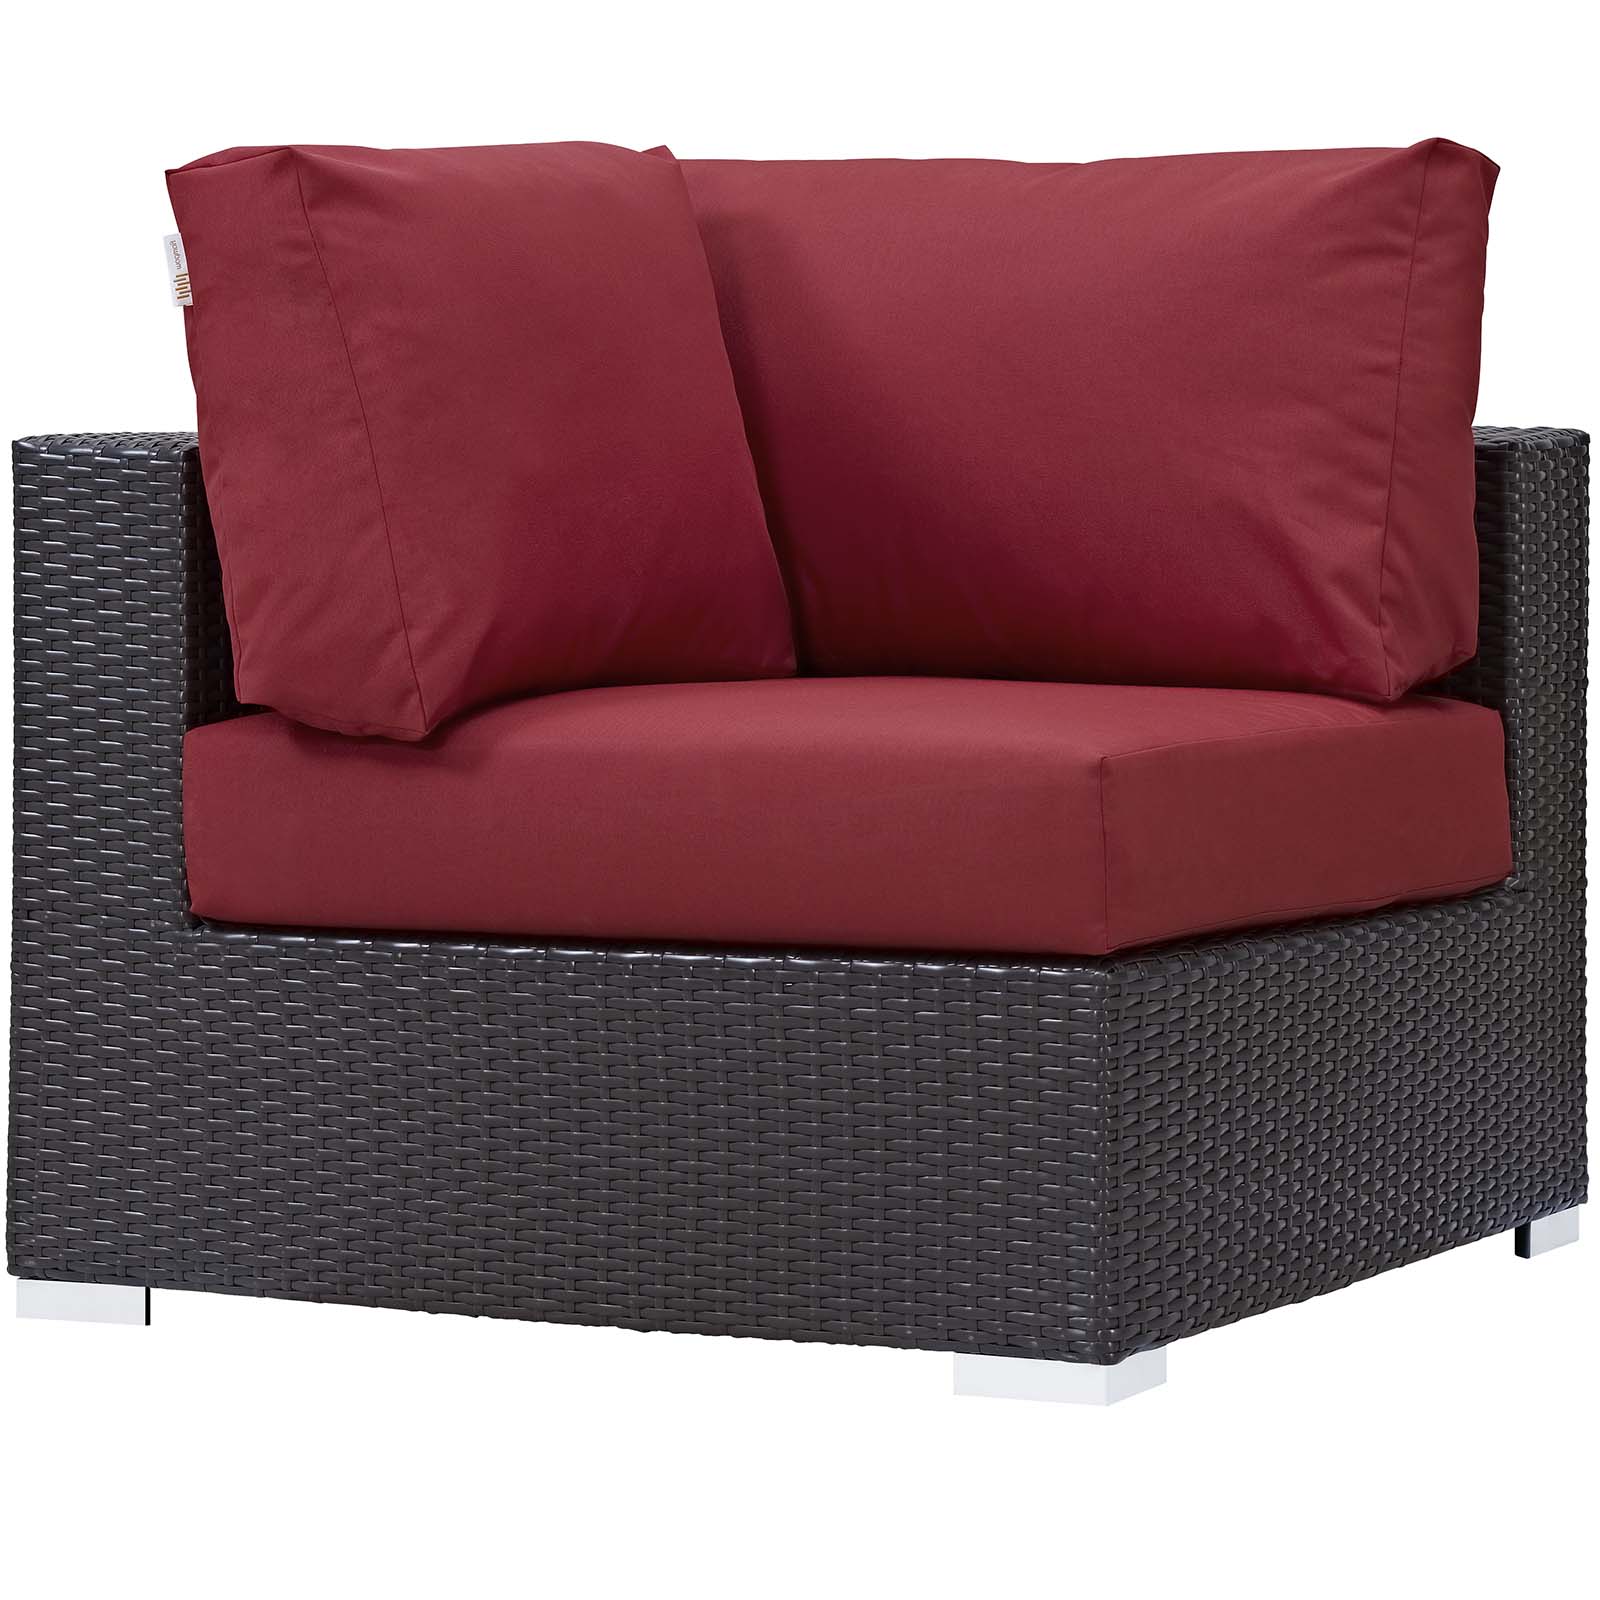 Contemporary Modern Urban Designer Outdoor Patio Balcony Garden Furniture Lounge Sofa, Chair and Coffee Table Fire Pit Set, Fabric Rattan Wicker, Red - image 4 of 8